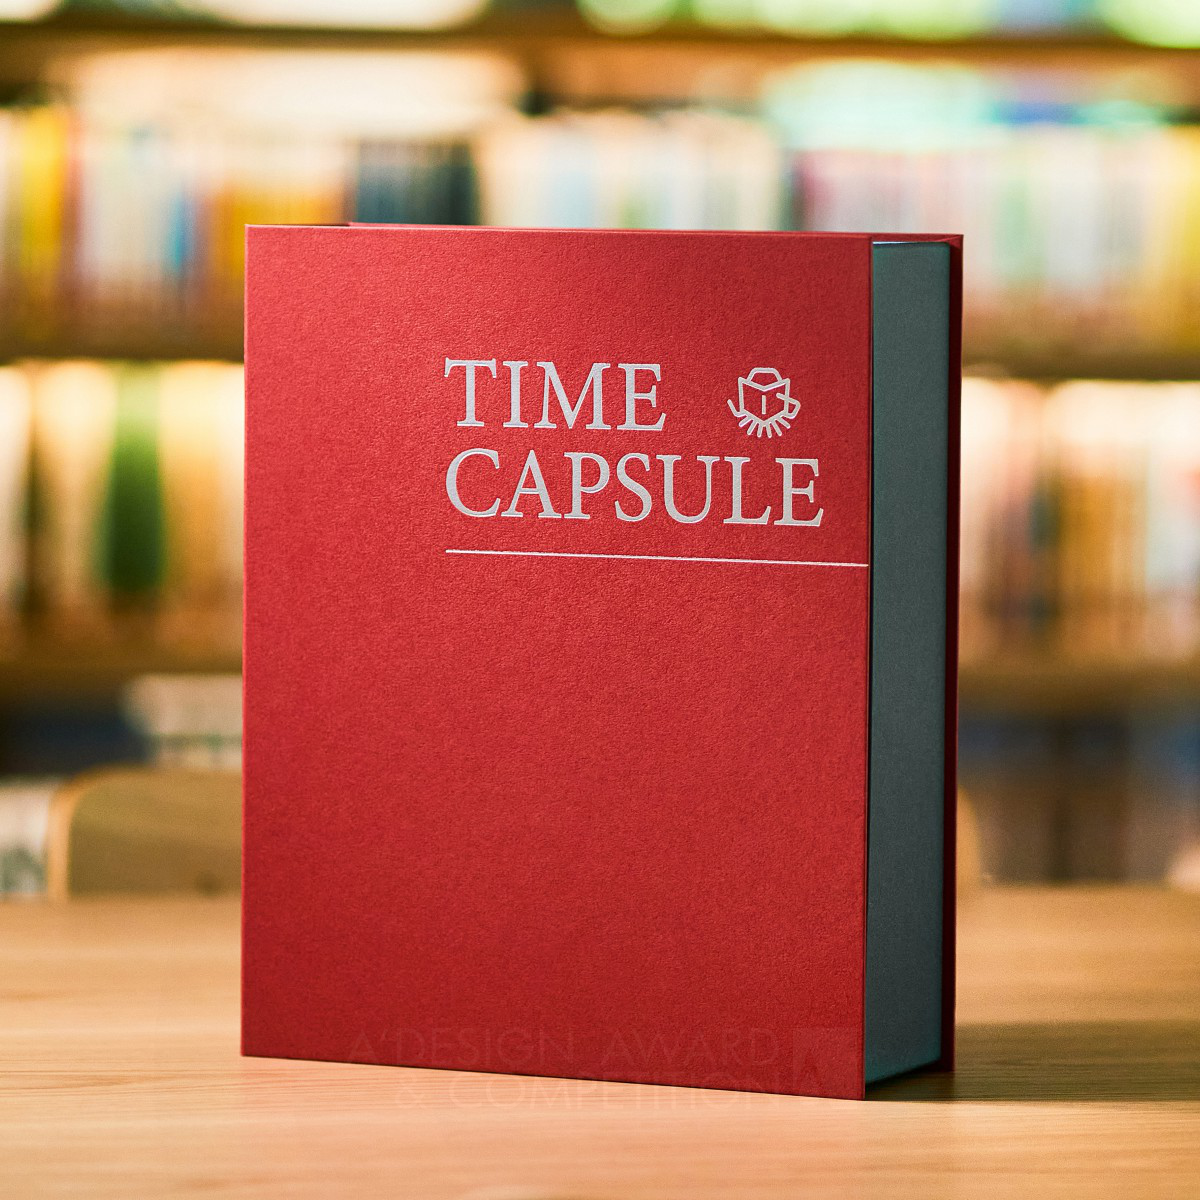 Time Capsule Package by Koichi Namimoto